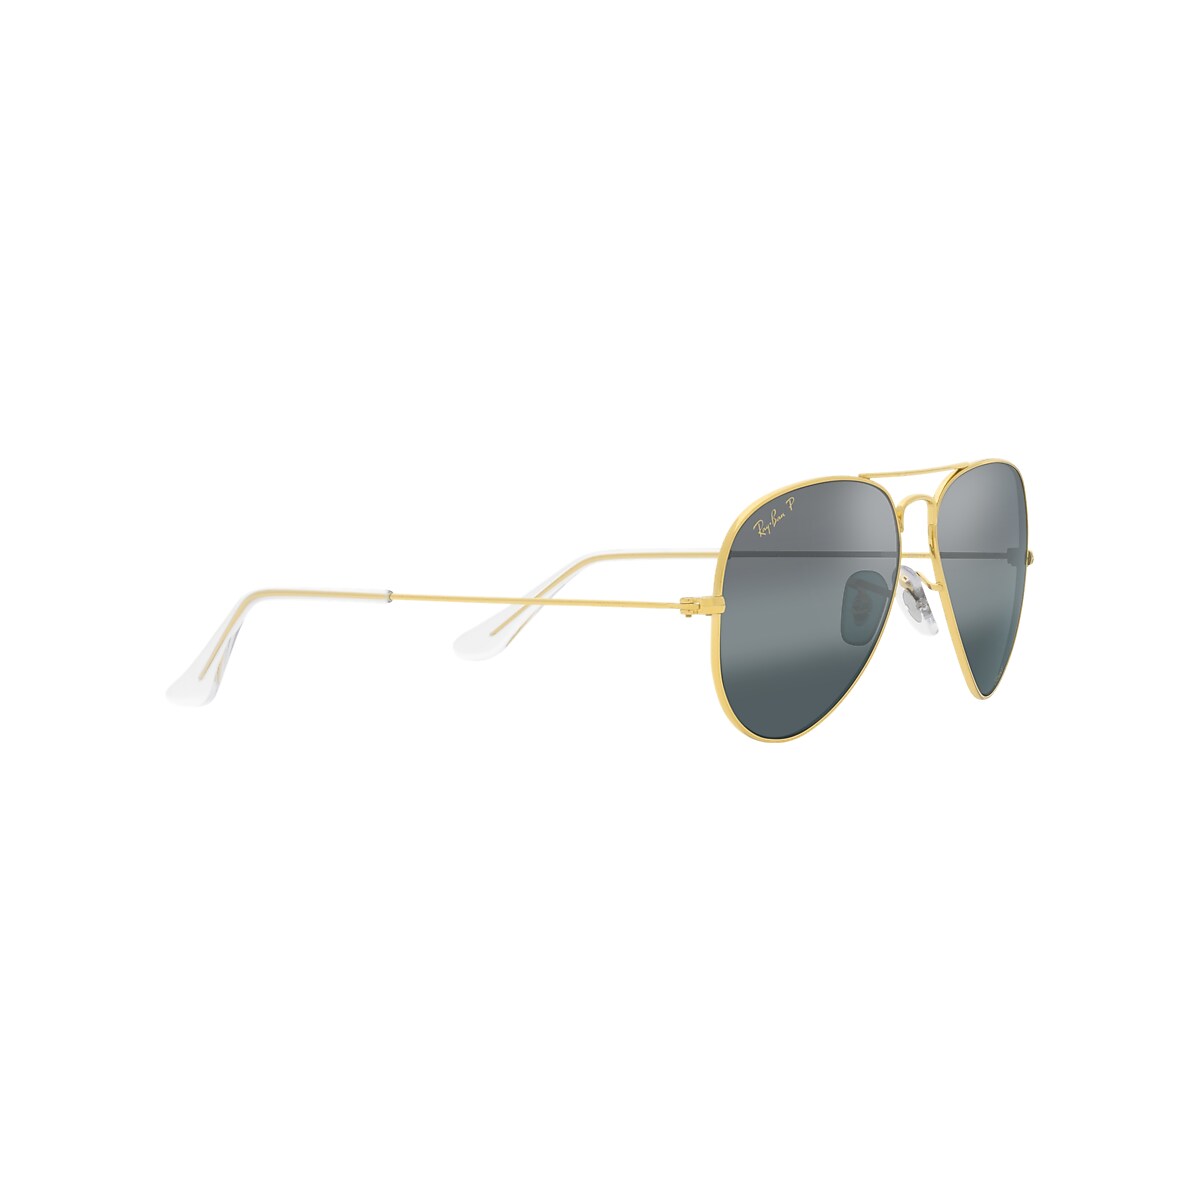 AVIATOR CHROMANCE Sunglasses in Gold and Silver/Blue - RB3025 